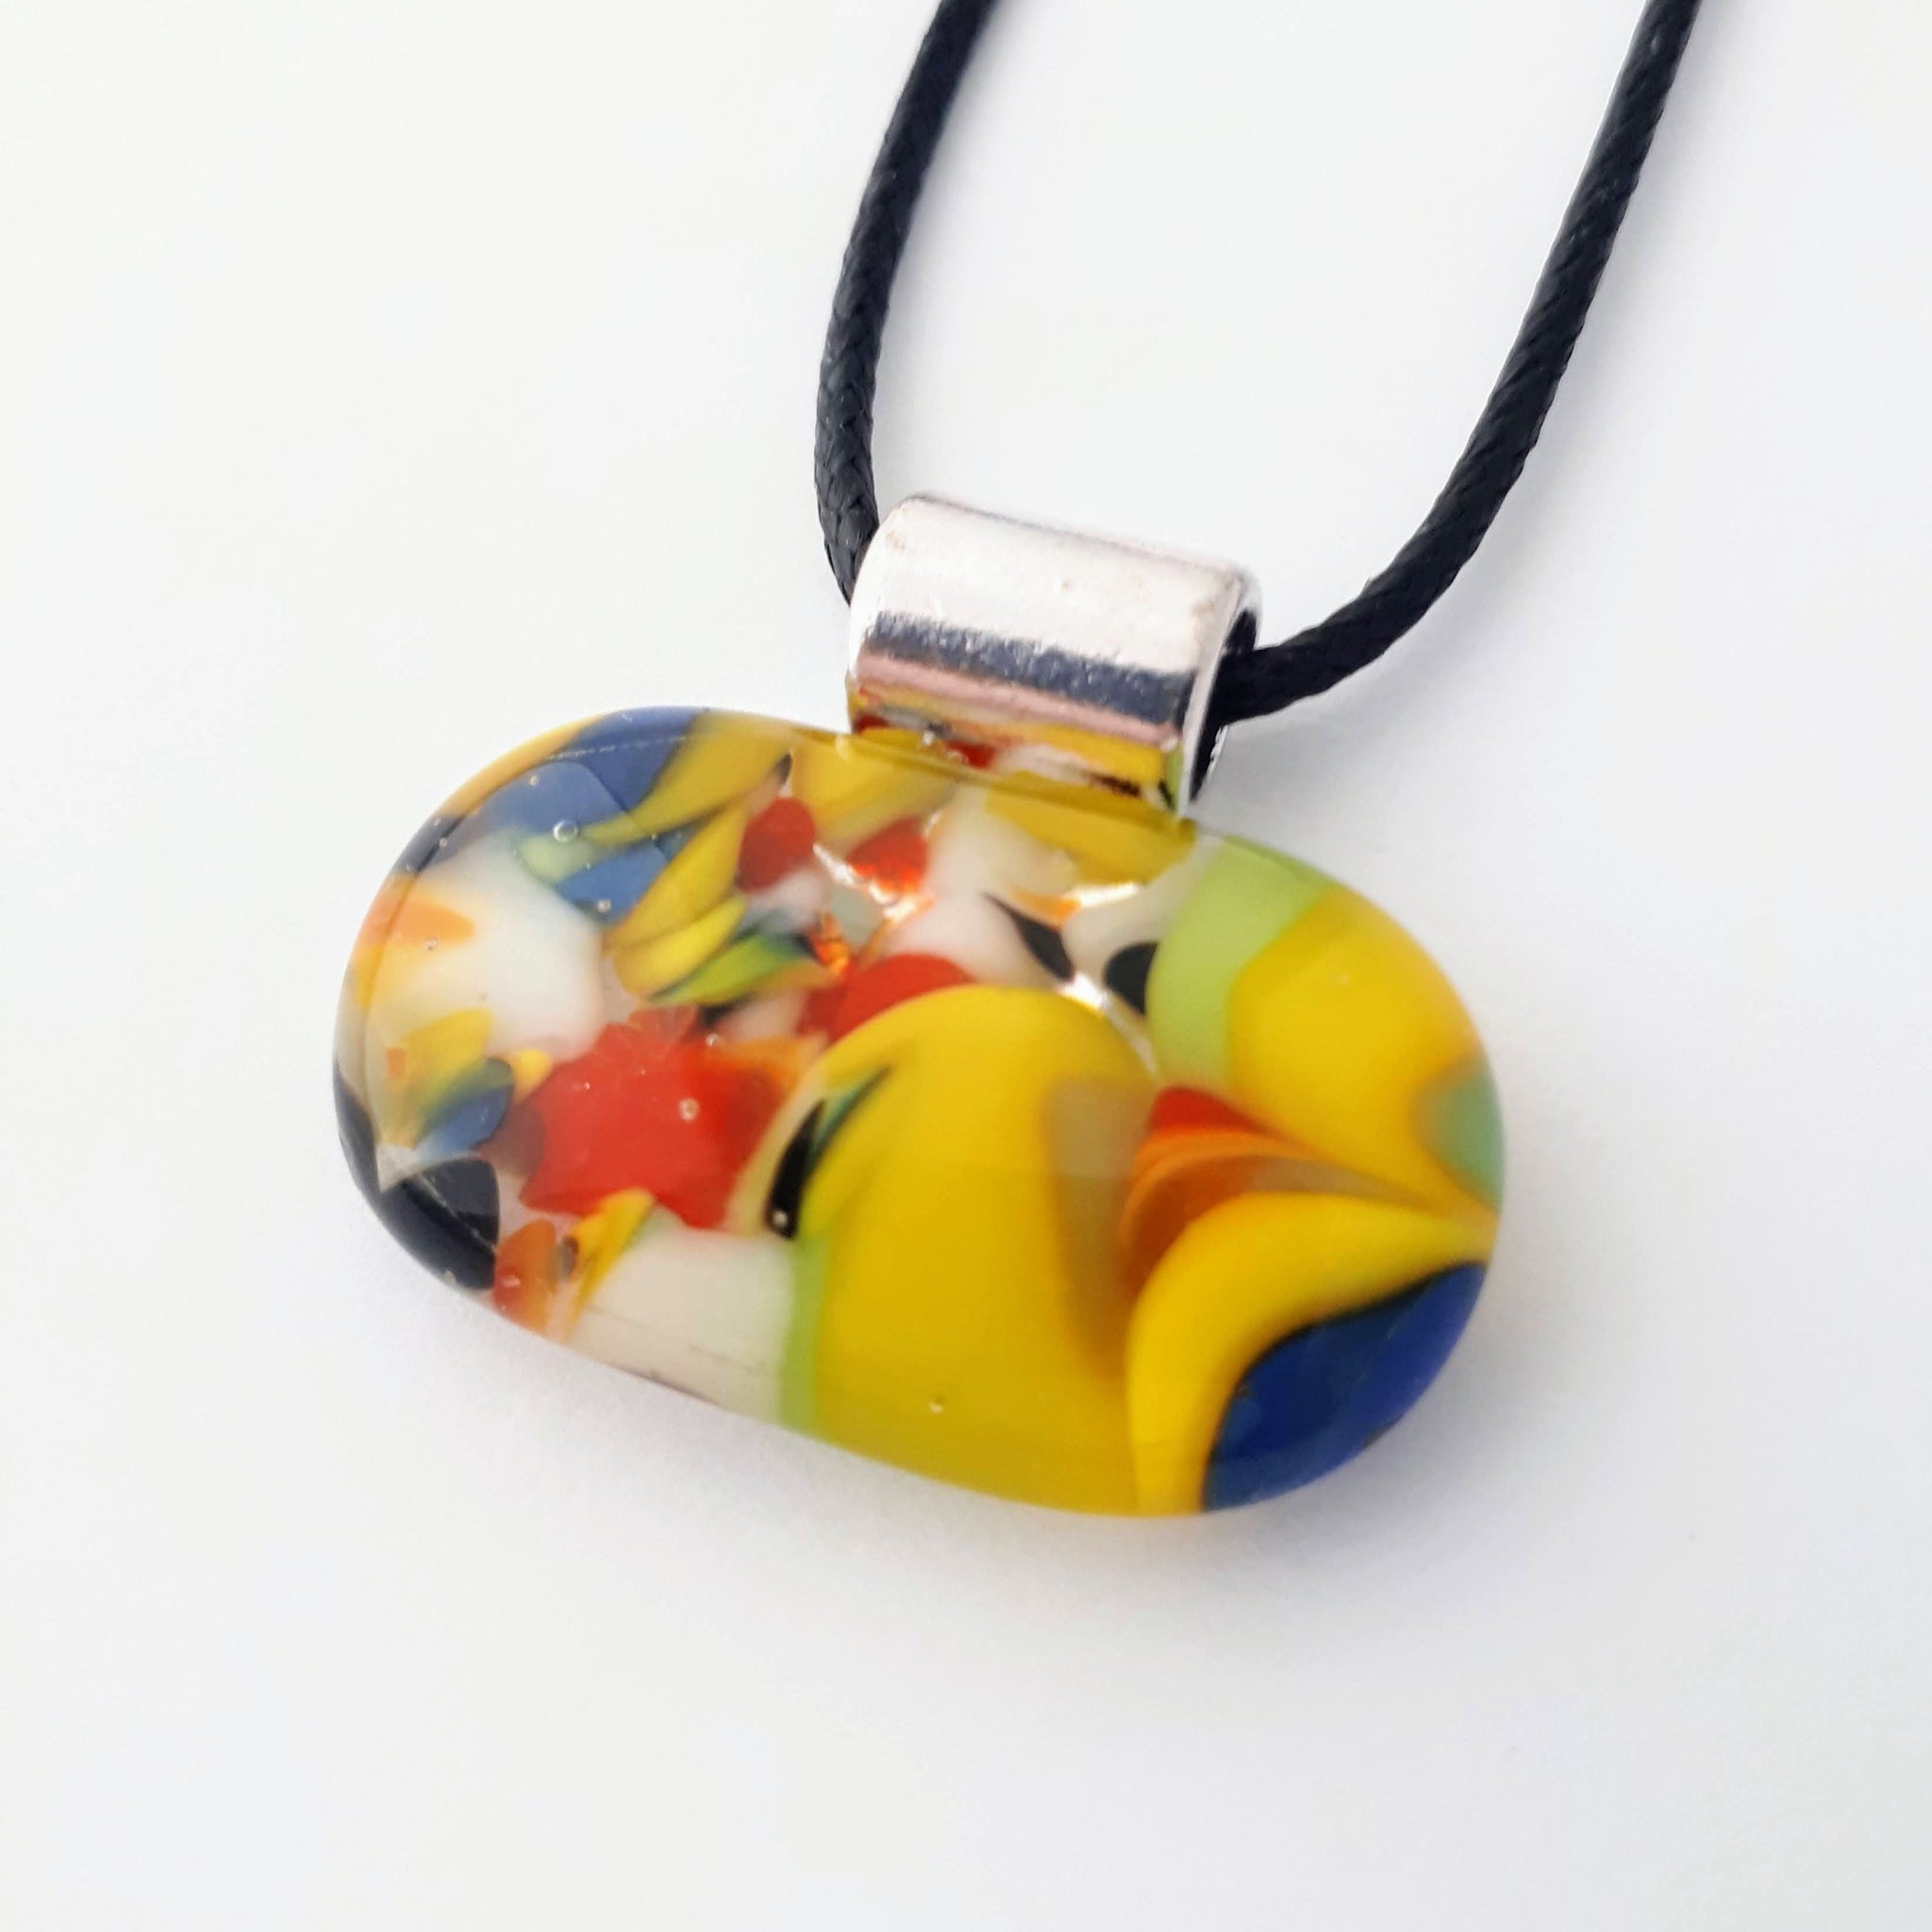 Wide oval glass fused necklace pendant with colourful blue, red, yellow, with small bits of green and white chunks/specs in it, with silver coloured bail and black cord on white background